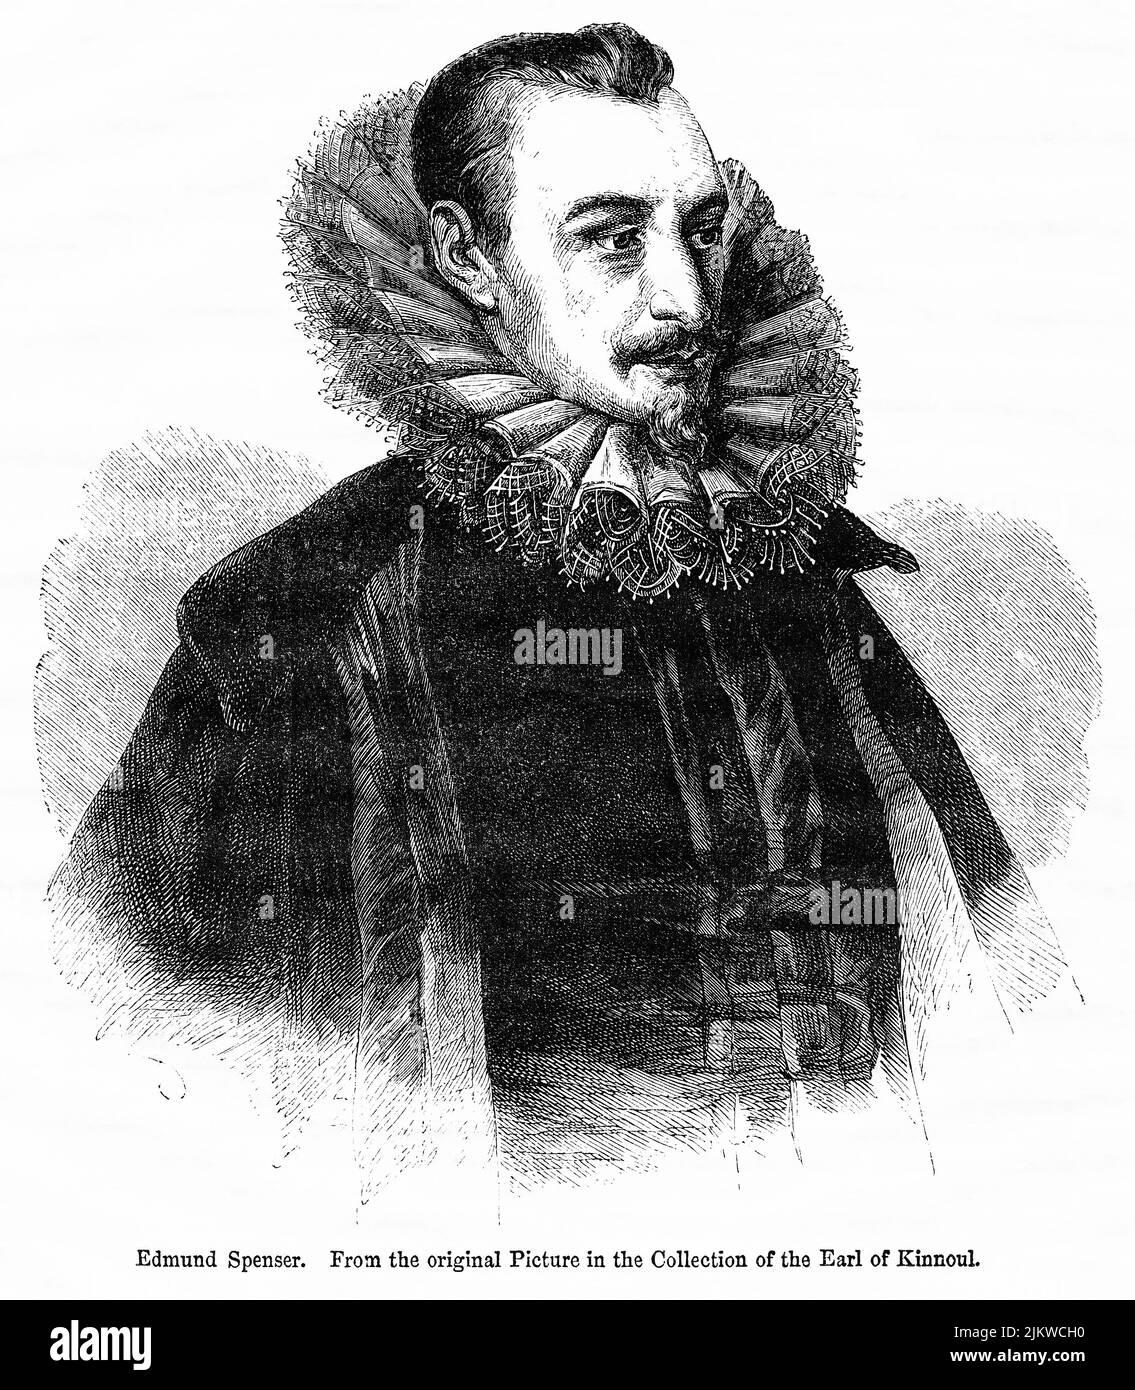 Edmund Spenser, from the original Picture in the Collection of the Earl of Kinnoul, Illustration from the Book, 'John Cassel’s Illustrated History of England, Volume II', text by William Howitt, Cassell, Petter, and Galpin, London, 1858 Stock Photo